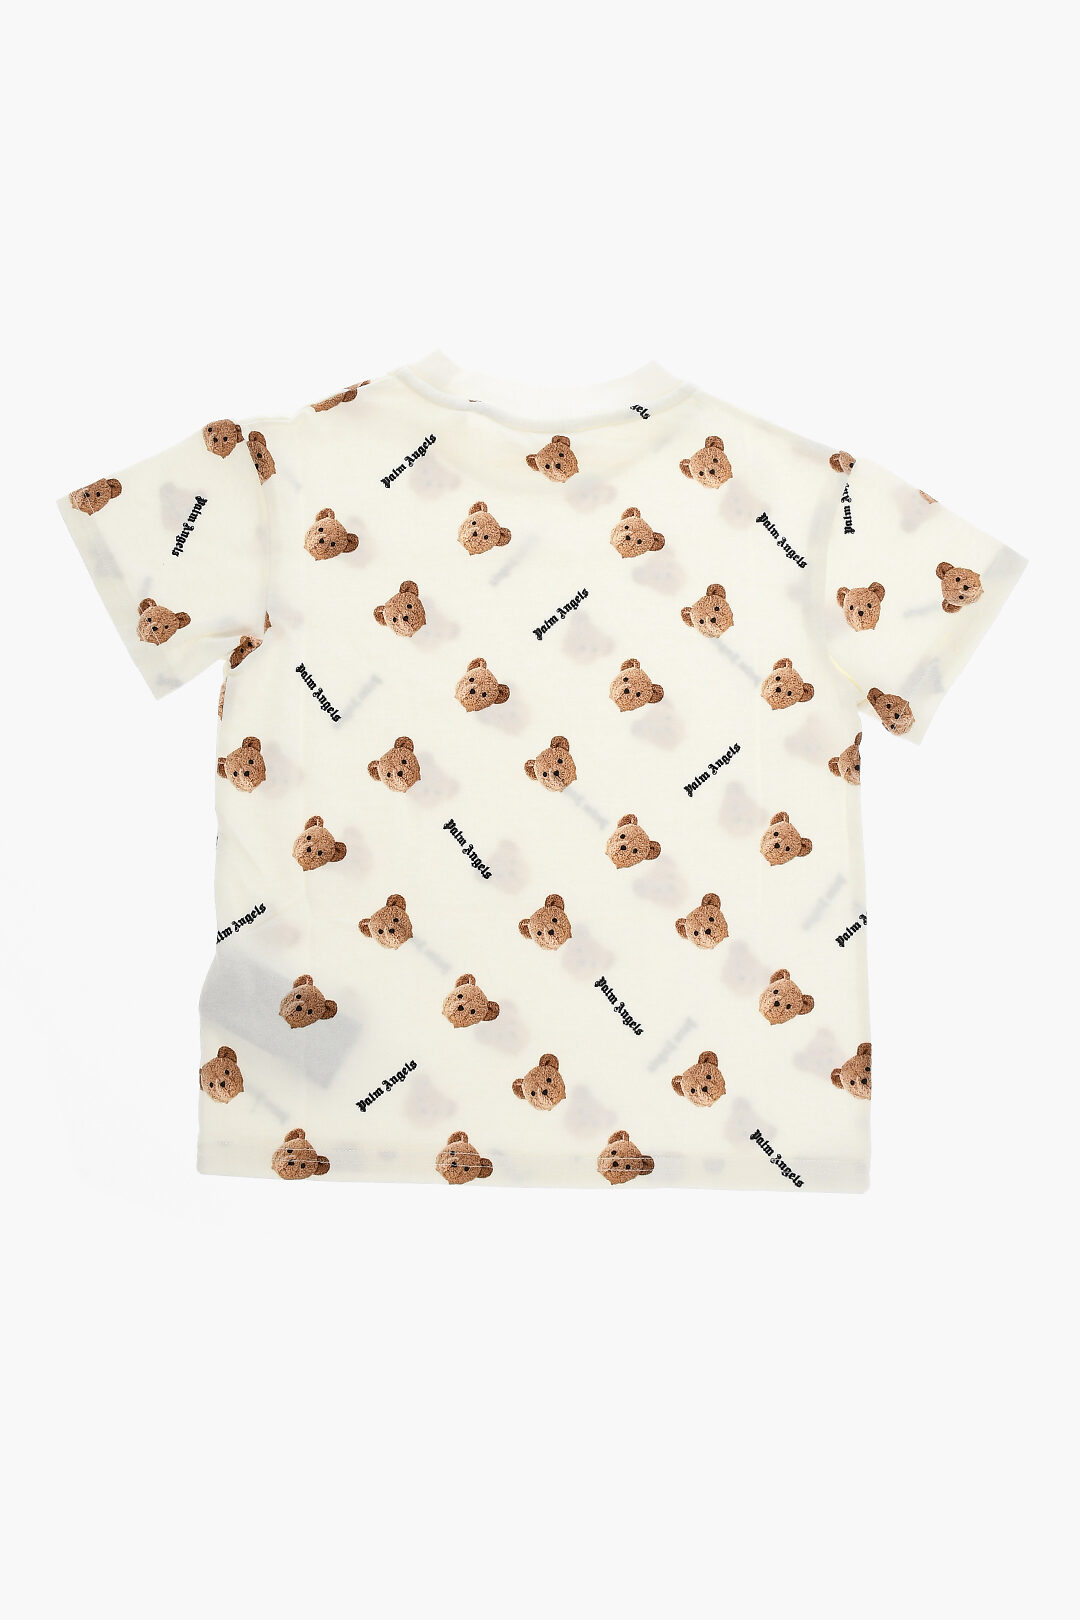 Palm Angels Kids All-Over Teddy Bear Printed Crew-neck T-Shirt girls -  Glamood Outlet